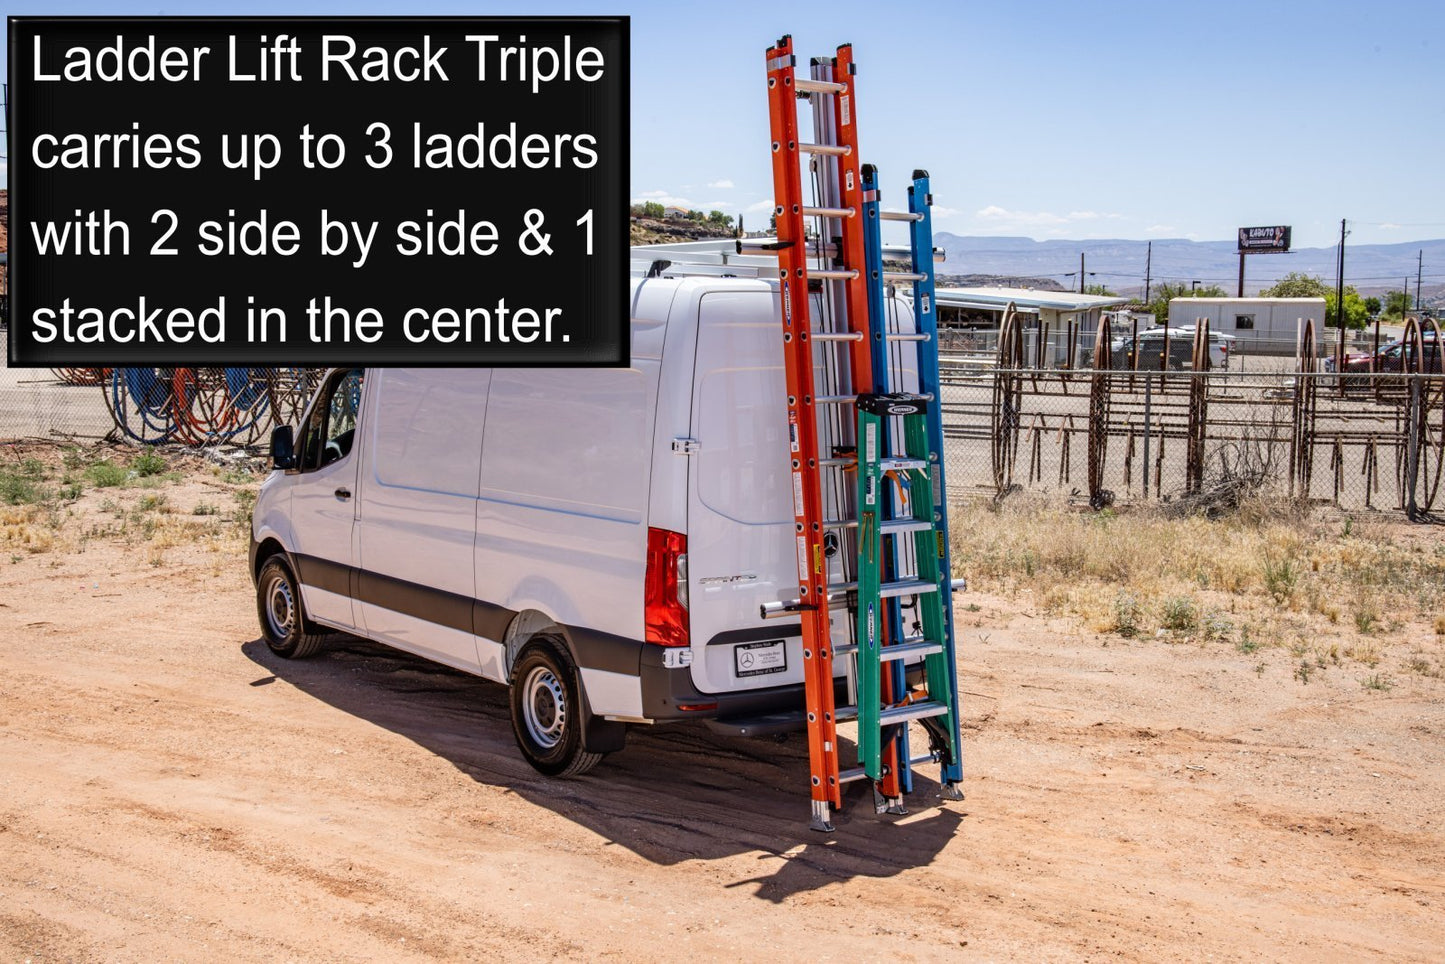 drop down ladder rack for 3 ladders, rear view